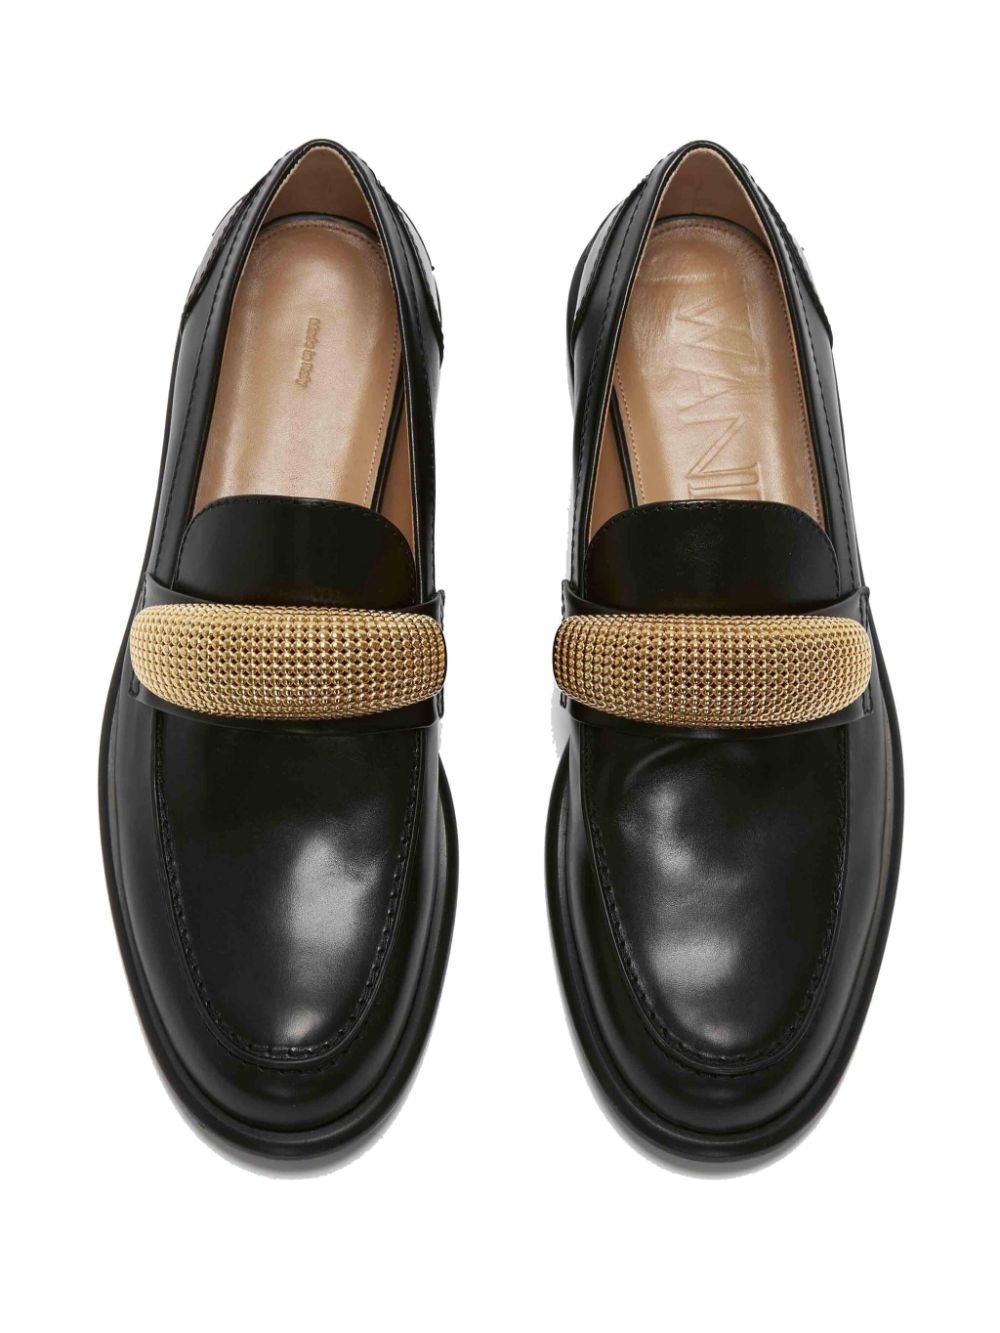 appliquÃ©-detail leather loafers - 4